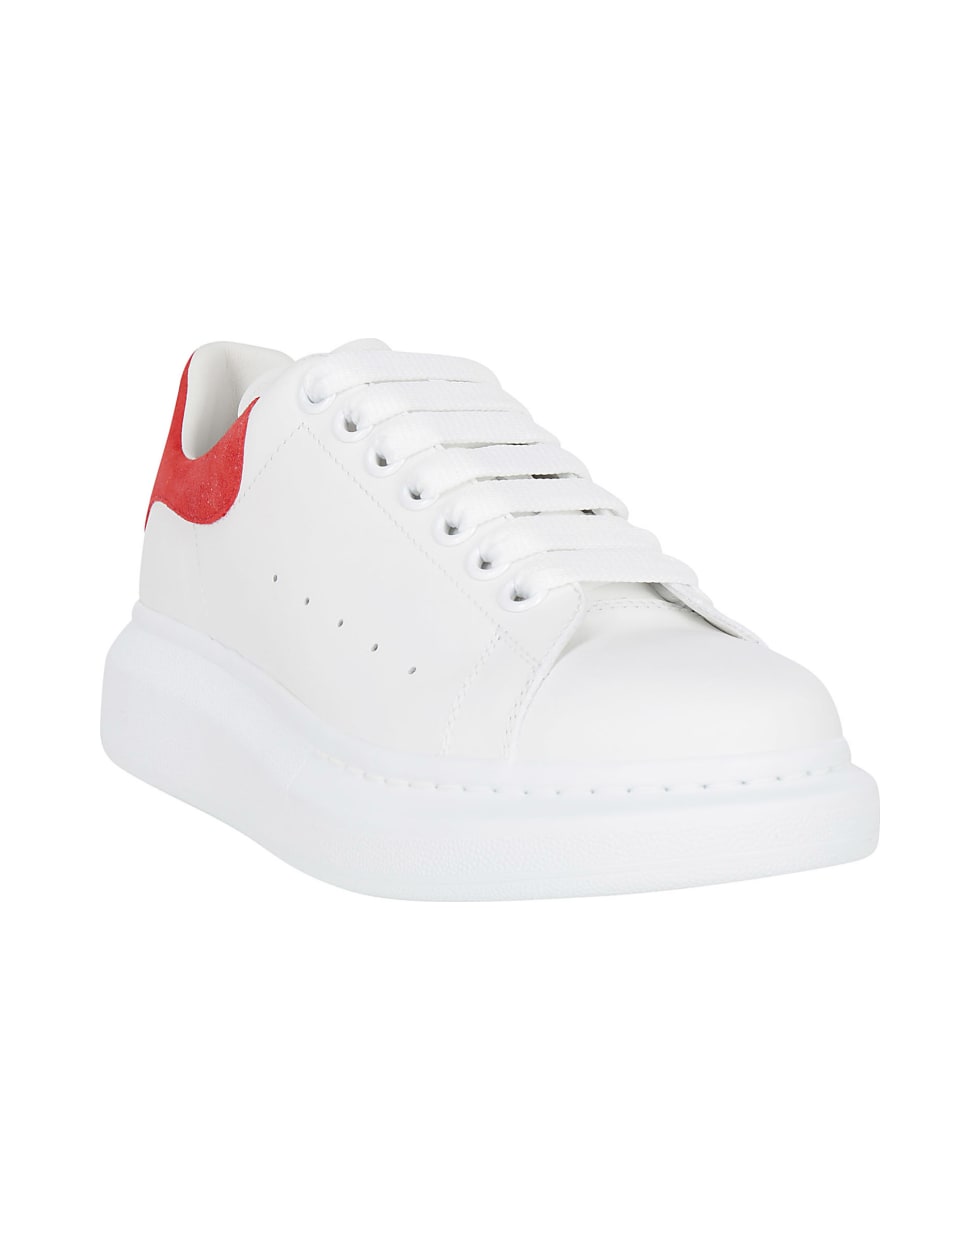 Alexander McQueen Oversized Low-top Sneakers - White/lust red